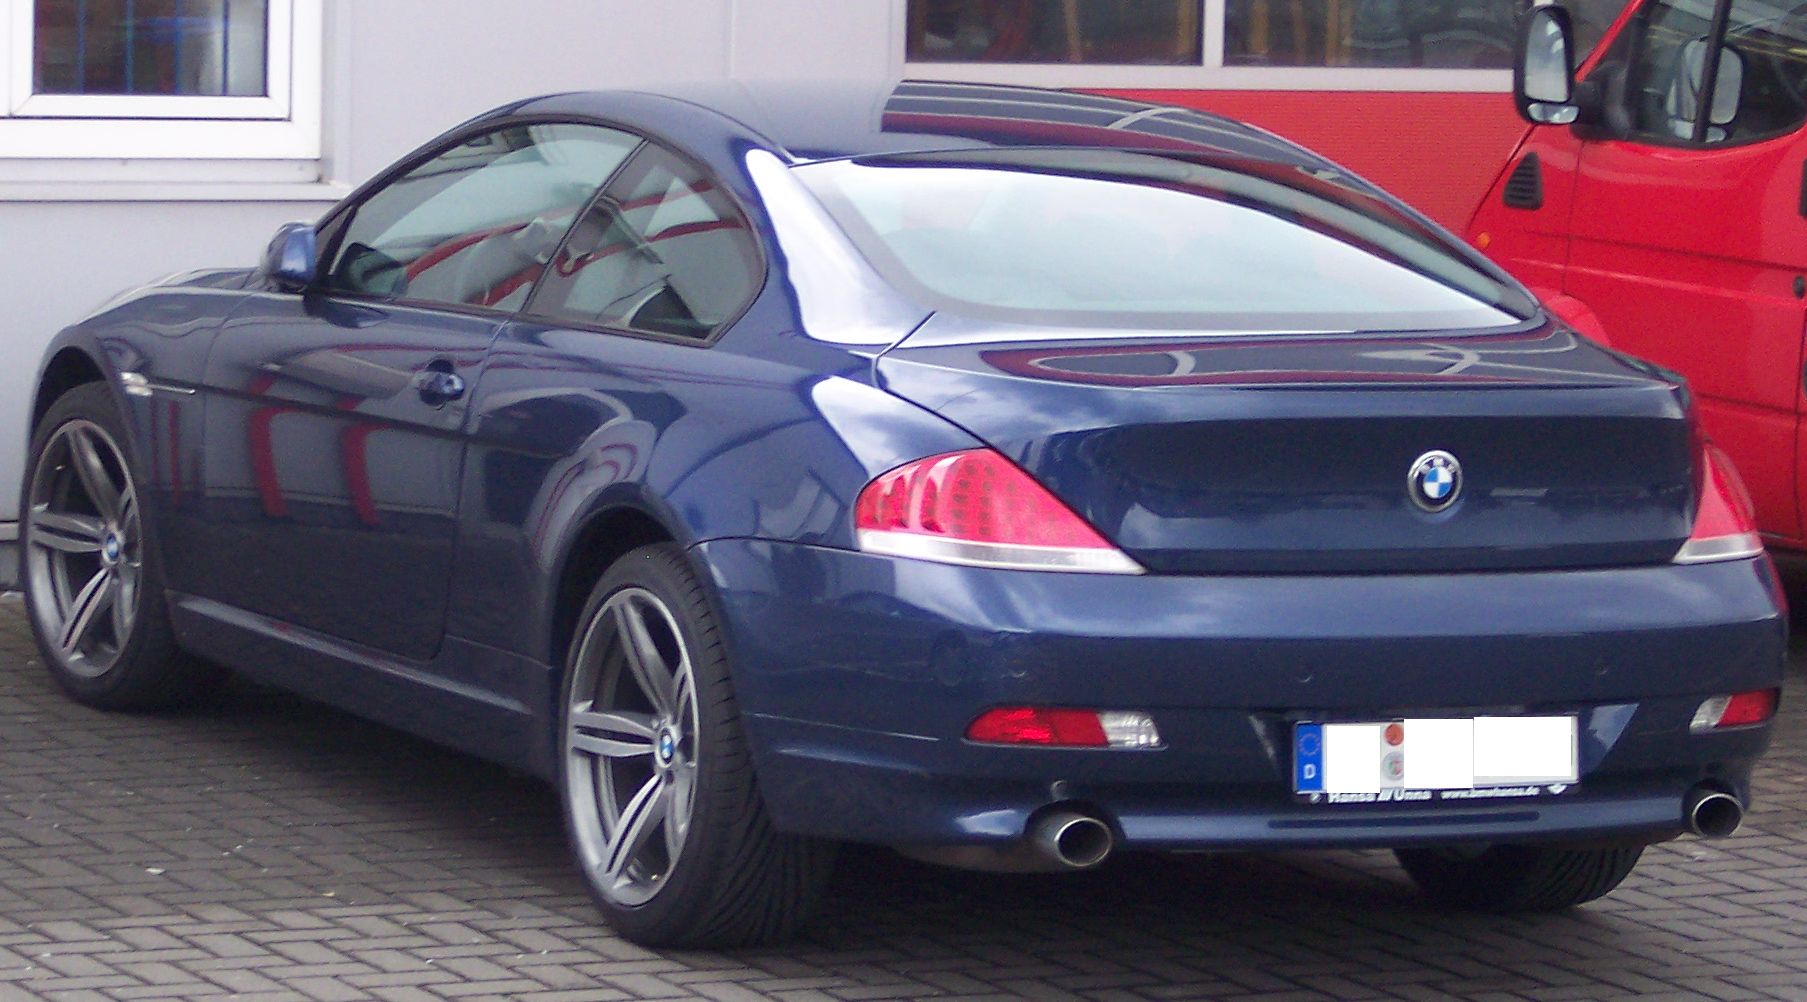 File:BMW 6er Coupe hl blue.jpg - Wikimedia Commons